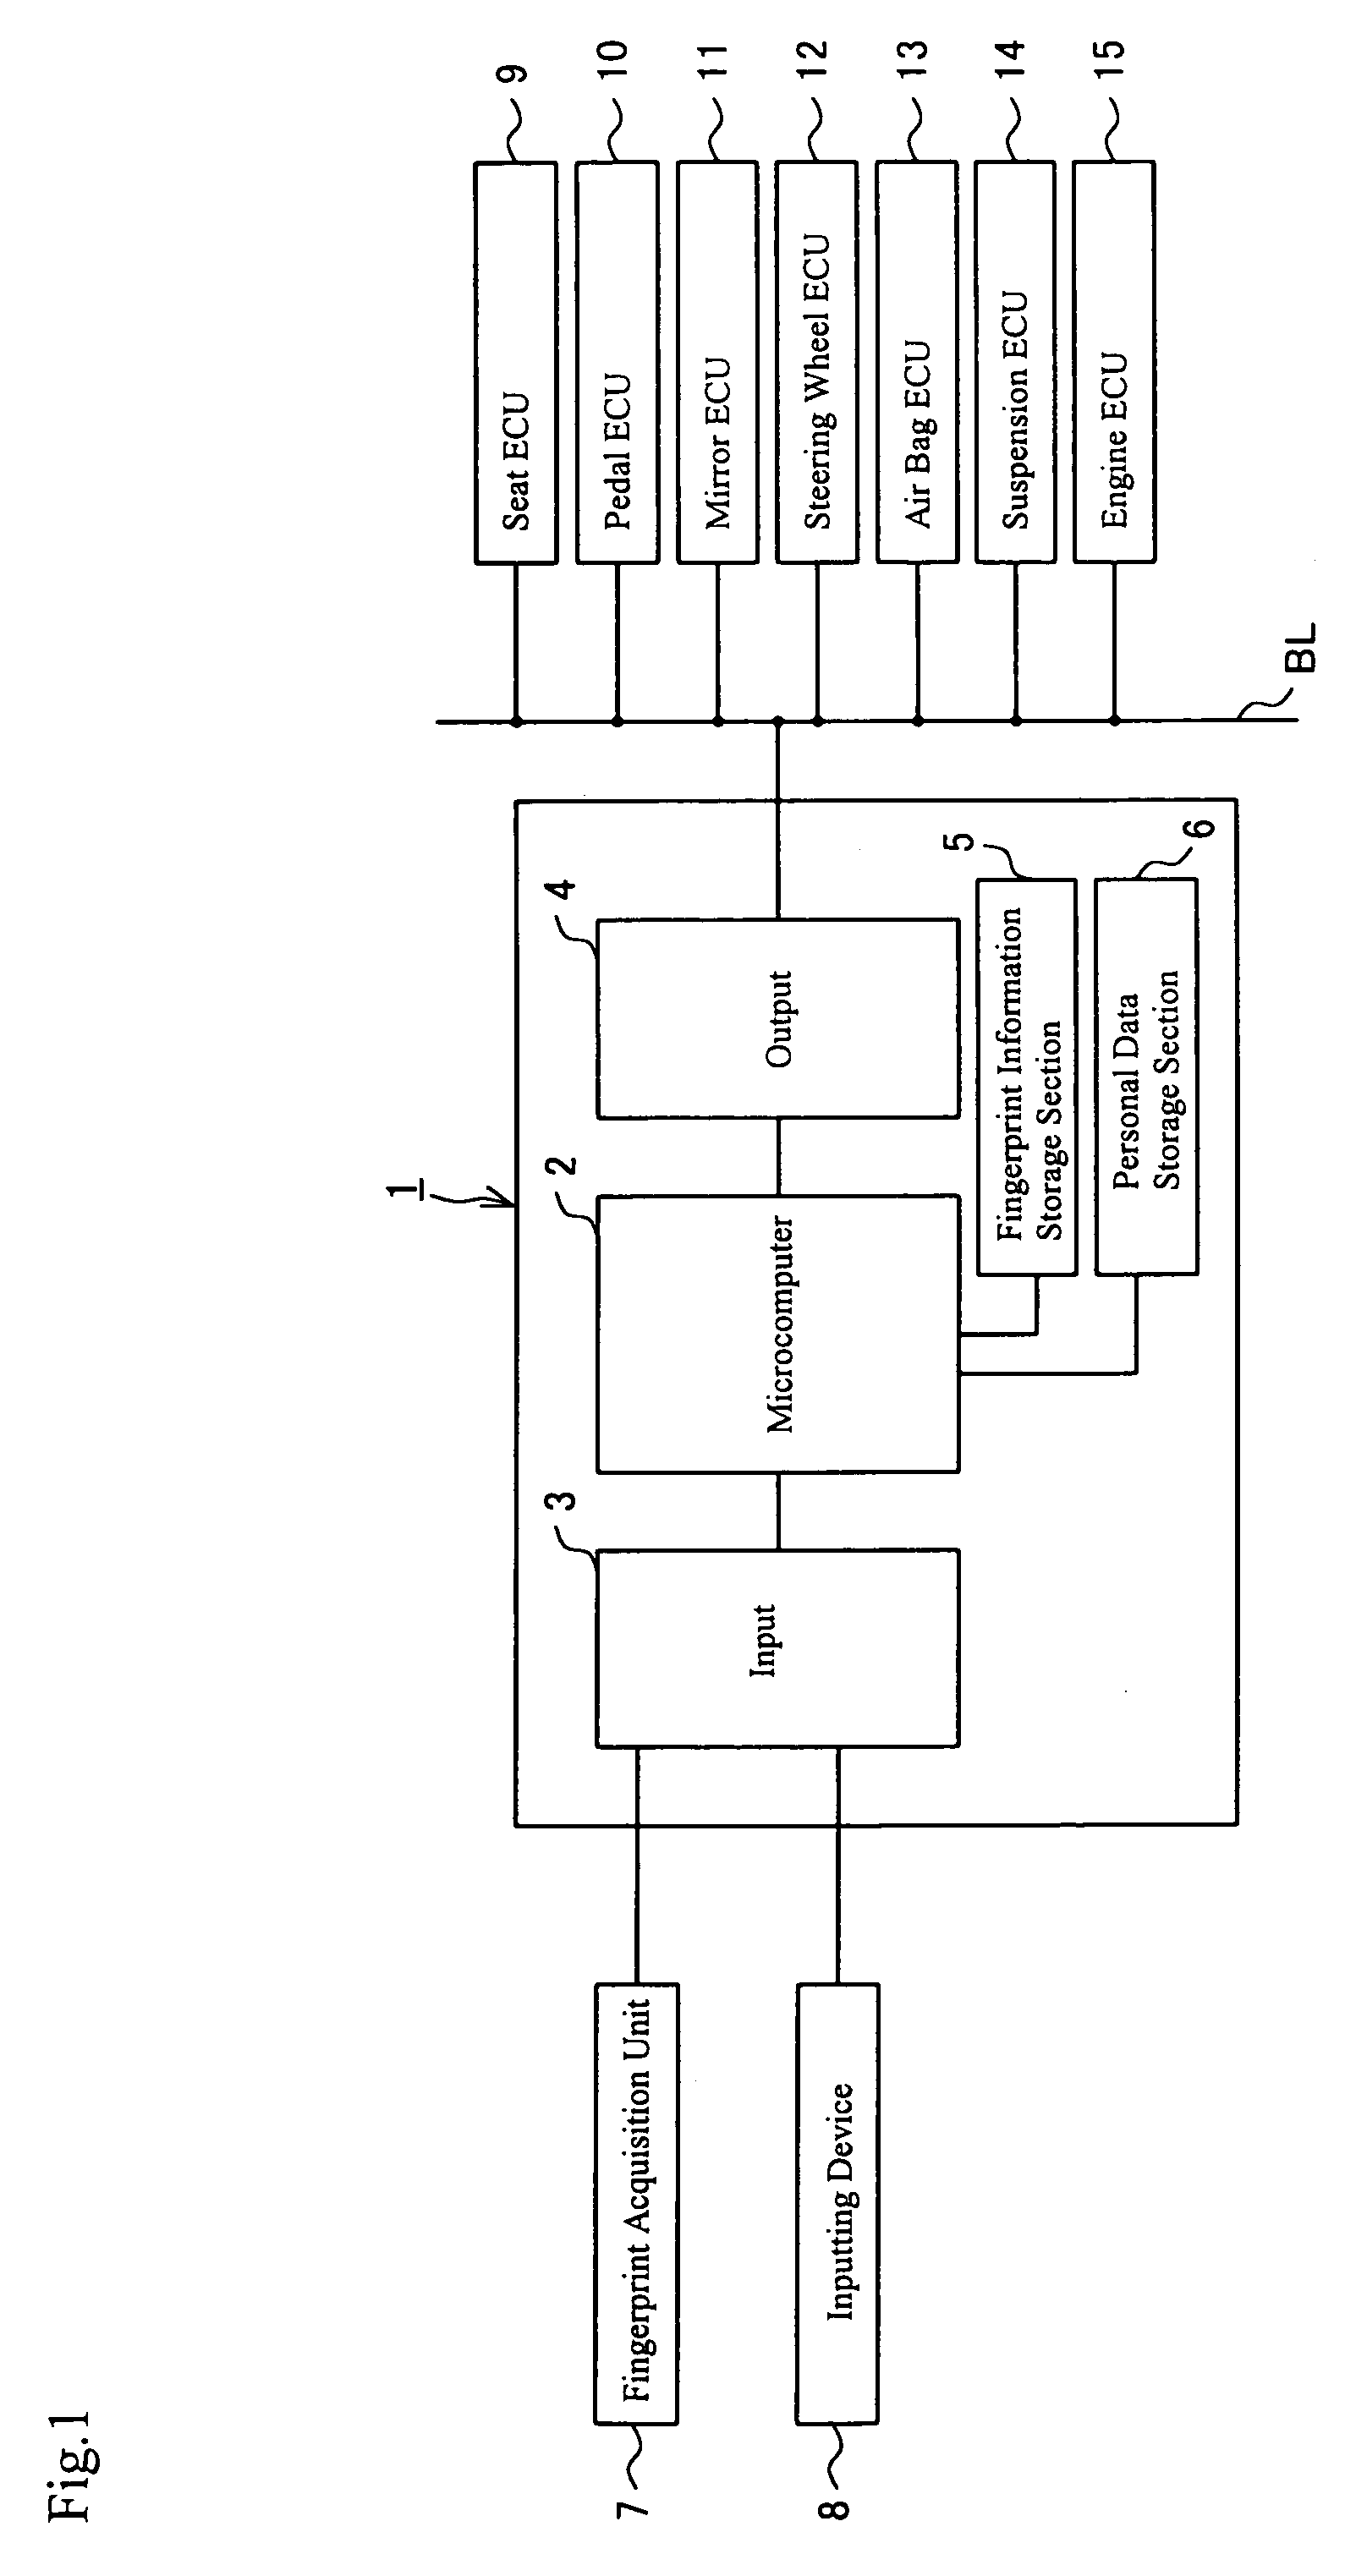 Vehicle environment control device